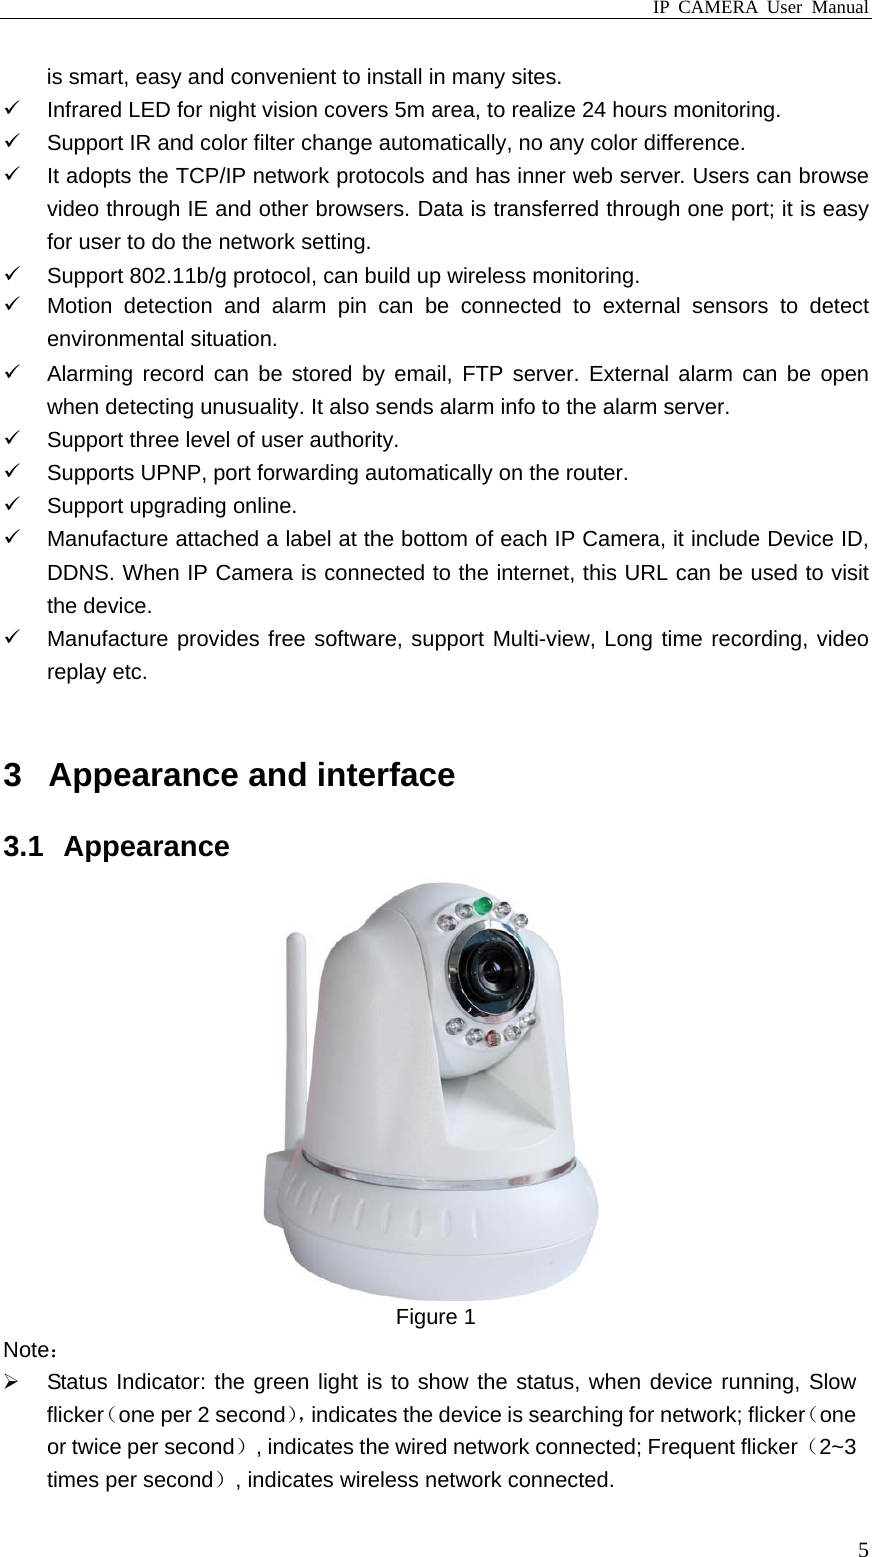 IP CAMERA User Manual  5is smart, easy and convenient to install in many sites. 9  Infrared LED for night vision covers 5m area, to realize 24 hours monitoring. 9  Support IR and color filter change automatically, no any color difference. 9  It adopts the TCP/IP network protocols and has inner web server. Users can browse video through IE and other browsers. Data is transferred through one port; it is easy for user to do the network setting. 9  Support 802.11b/g protocol, can build up wireless monitoring. 9  Motion detection and alarm pin can be connected to external sensors to detect environmental situation. 9  Alarming record can be stored by email, FTP server. External alarm can be open when detecting unusuality. It also sends alarm info to the alarm server. 9  Support three level of user authority. 9 Supports UPNP, port forwarding automatically on the router. 9  Support upgrading online. 9  Manufacture attached a label at the bottom of each IP Camera, it include Device ID, DDNS. When IP Camera is connected to the internet, this URL can be used to visit the device. 9  Manufacture provides free software, support Multi-view, Long time recording, video replay etc.  3  Appearance and interface 3.1 Appearance  Figure 1 Note： ¾  Status Indicator: the green light is to show the status, when device running, Slow flicker（one per 2 second），indicates the device is searching for network; flicker（one or twice per second）, indicates the wired network connected; Frequent flicker（2~3 times per second）, indicates wireless network connected. 